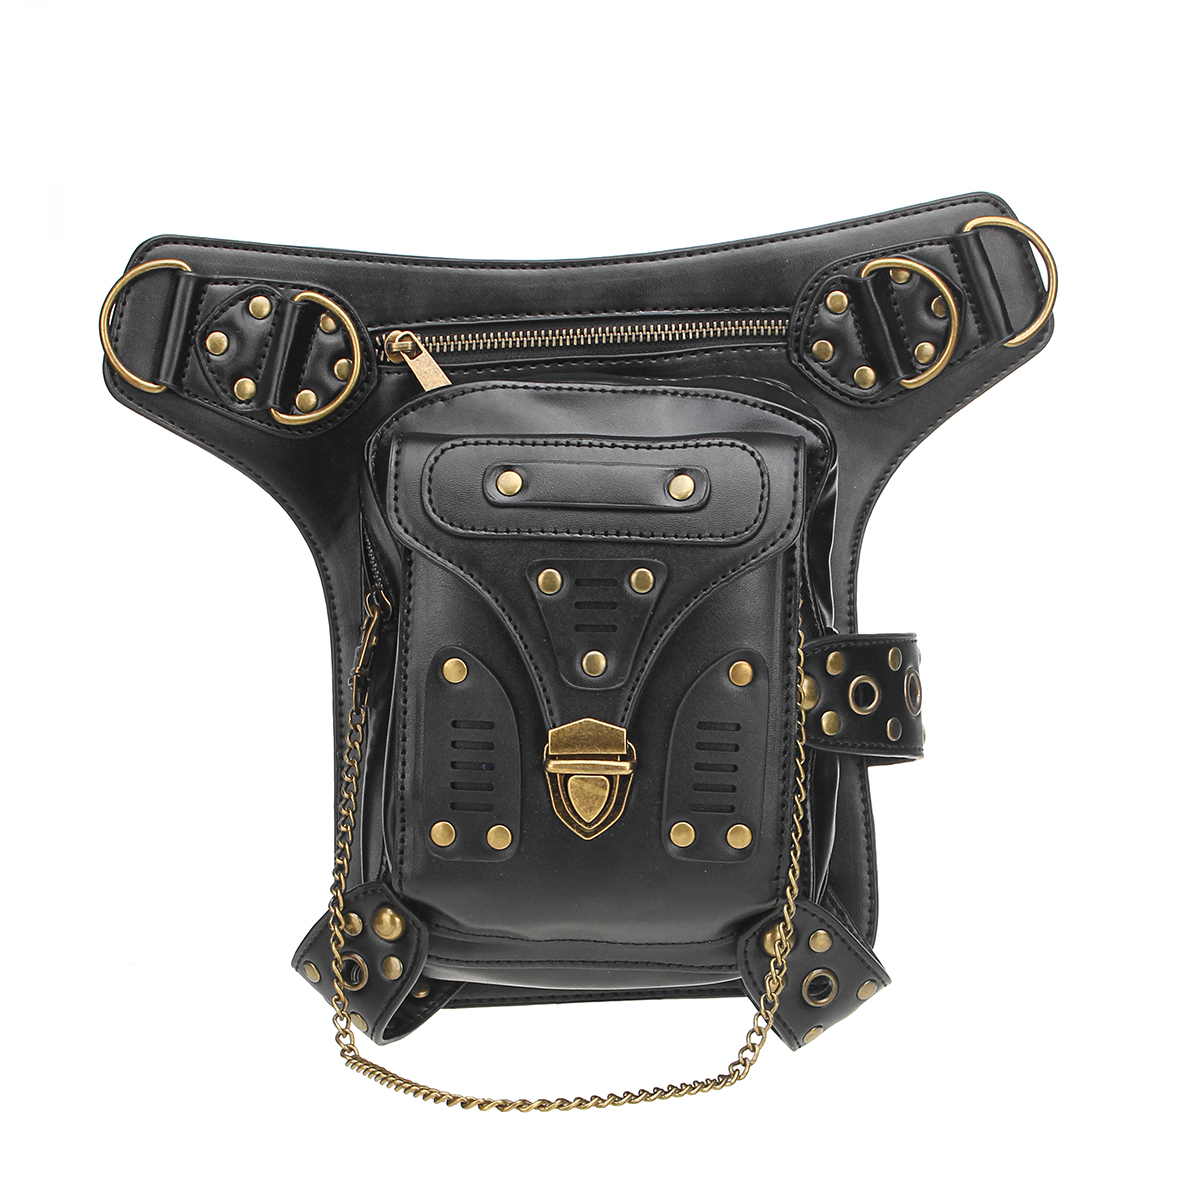 Other Clothing, Boots & Accessories - PU Leather Waist Bag Steampunk Multifunctional Shoulder ...